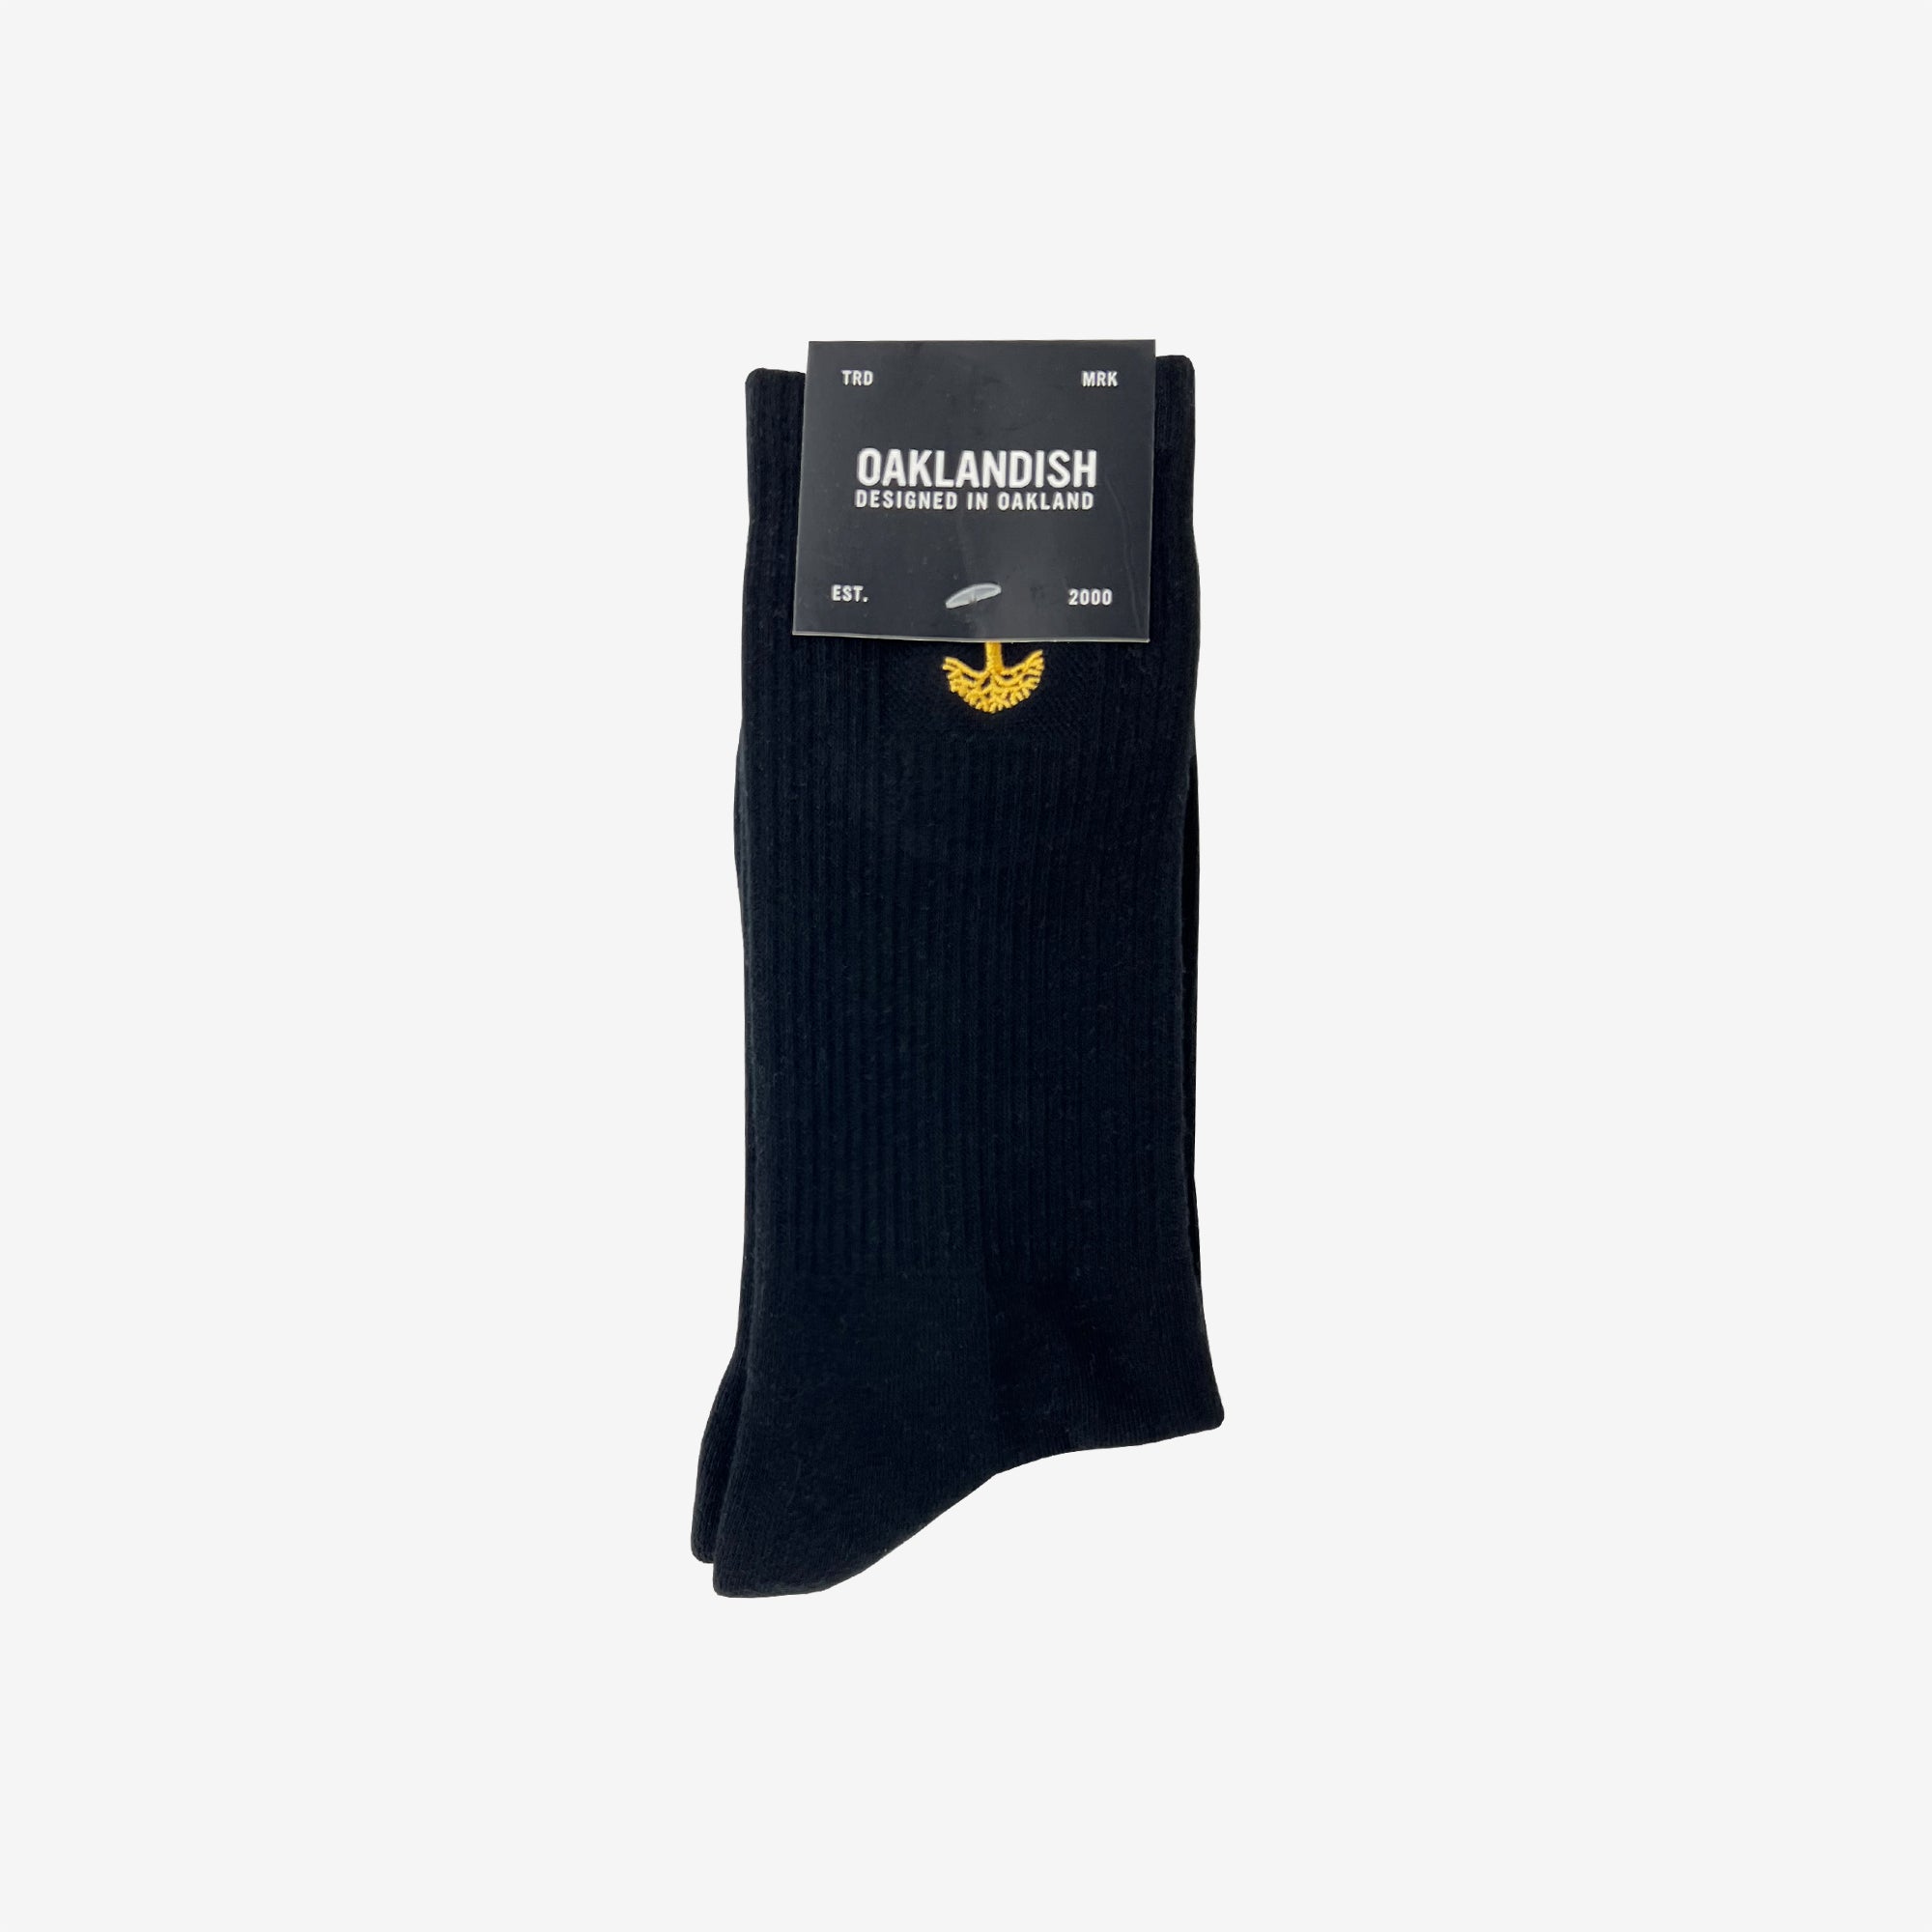 High-cut men's black crew socks with gold embroidered Oaklandish logo at the top wrapped in Oaklandish retail packaging.